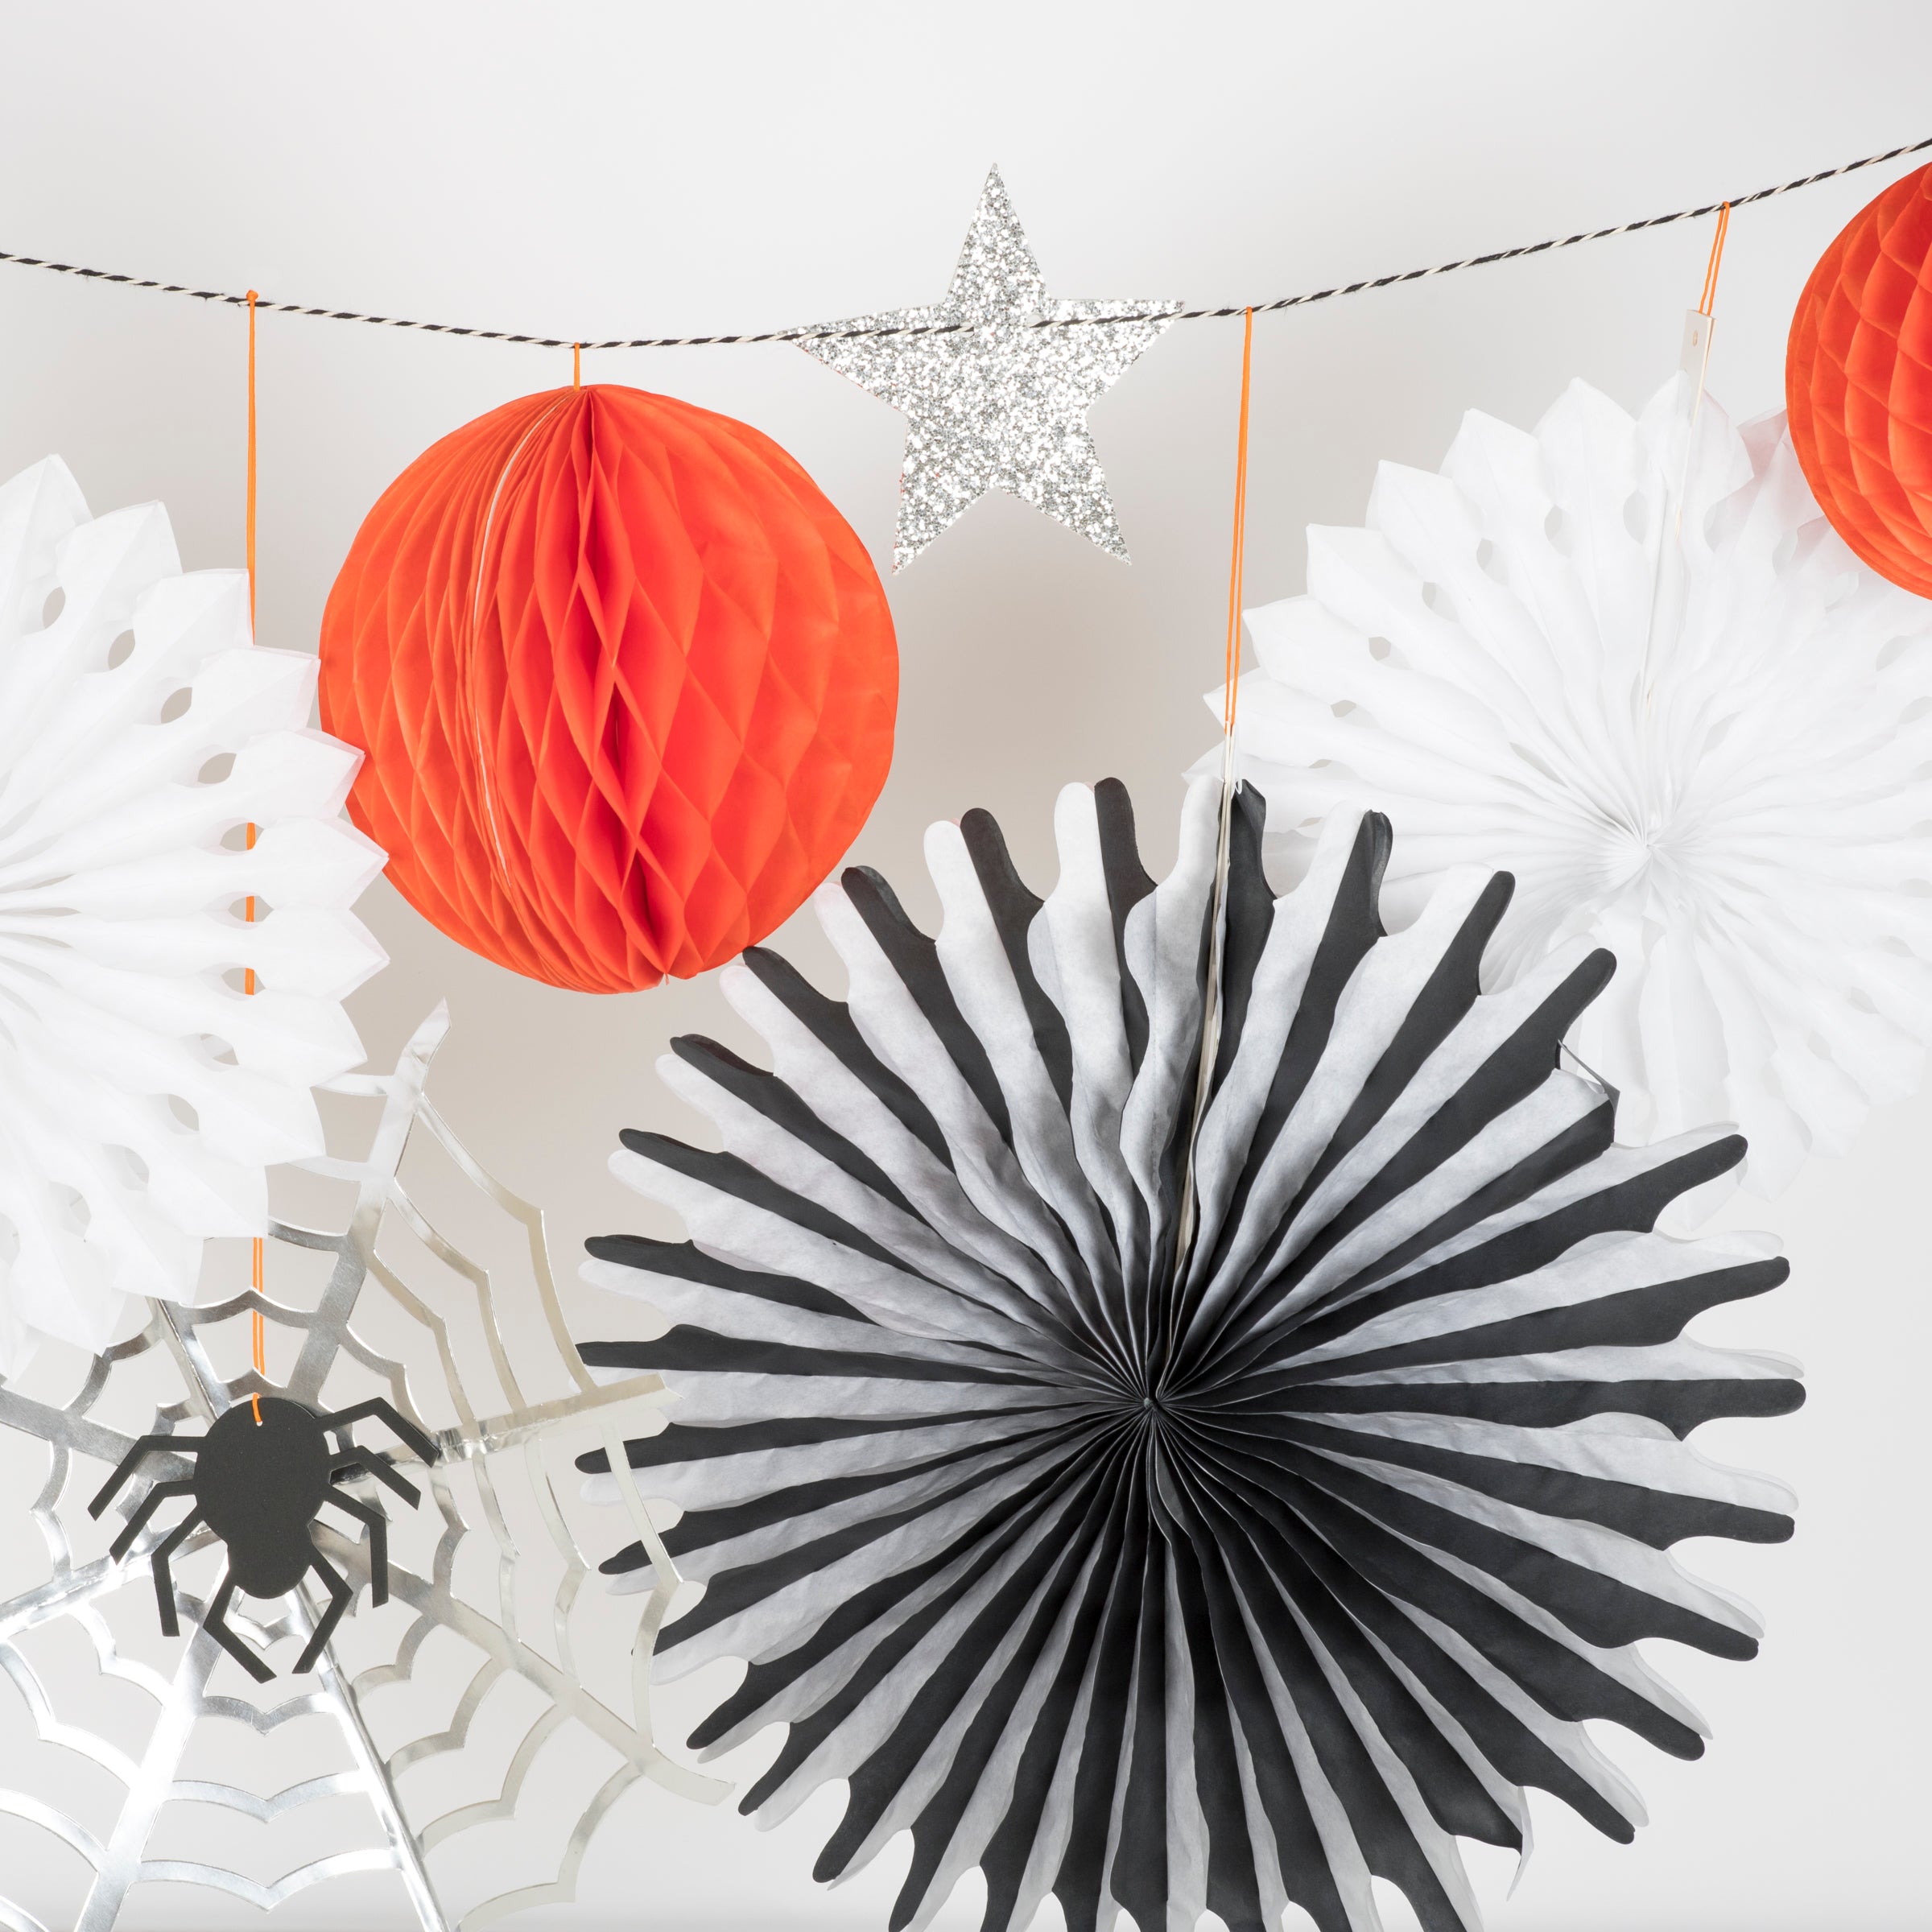 Our Halloween wall decoration features spiders, cobwebs, pinwheels, stars, honeycomb balls and a moon.